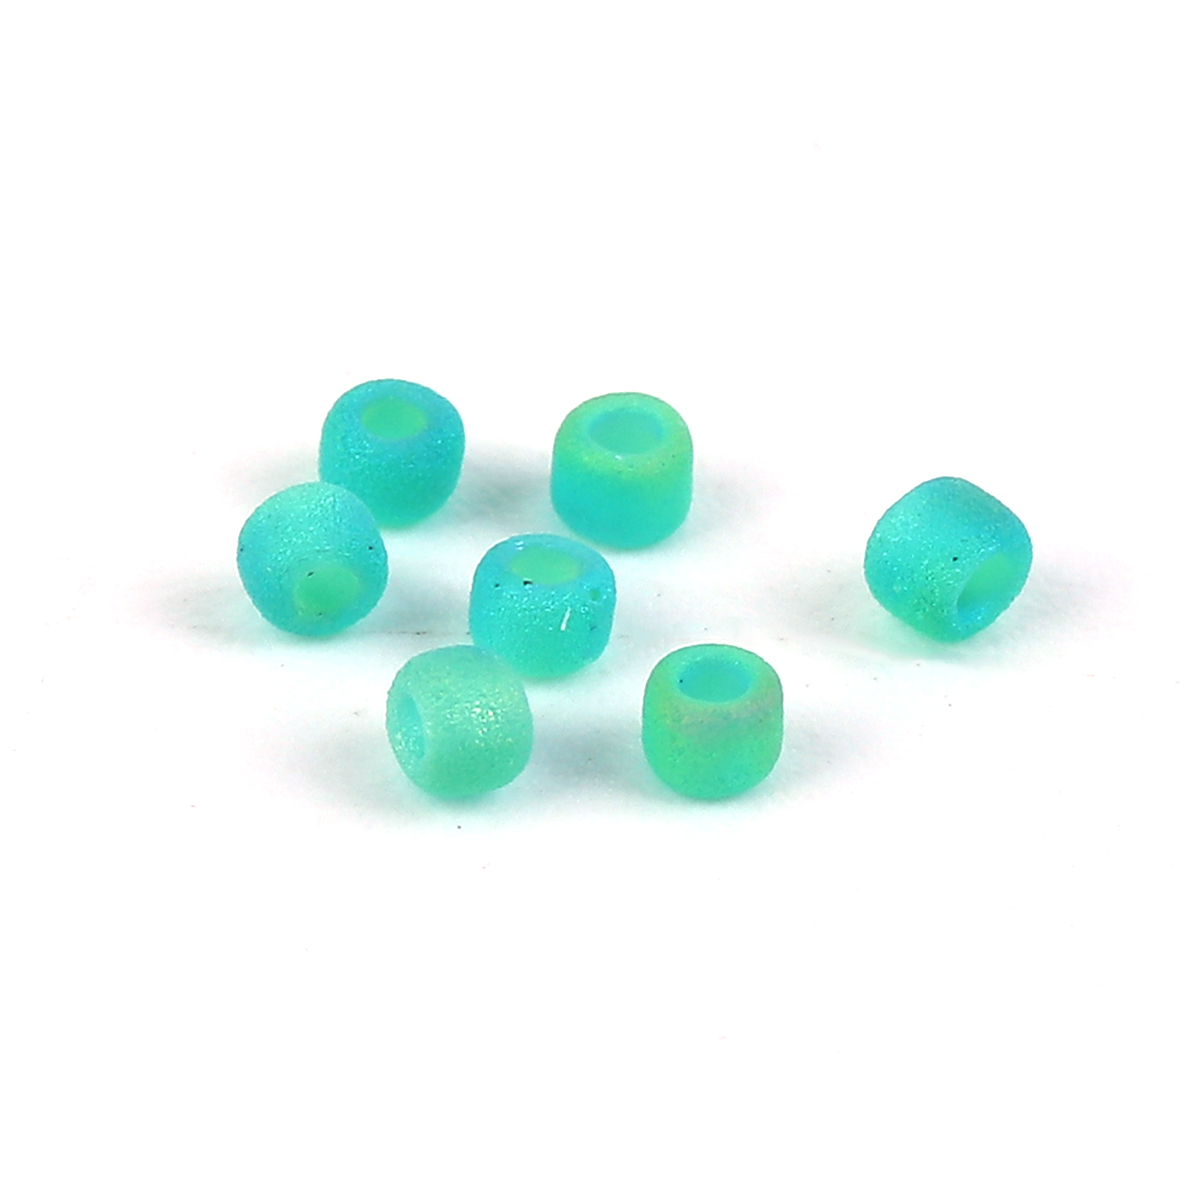 Picture of (Japan Import) Glass Seed Beads Round Green Blue Rainbow Frosted Opaque About 2mm x 1.5mm, Hole: Approx 0.7mm, 60 Grams (Approx 95 PCs/Gram)